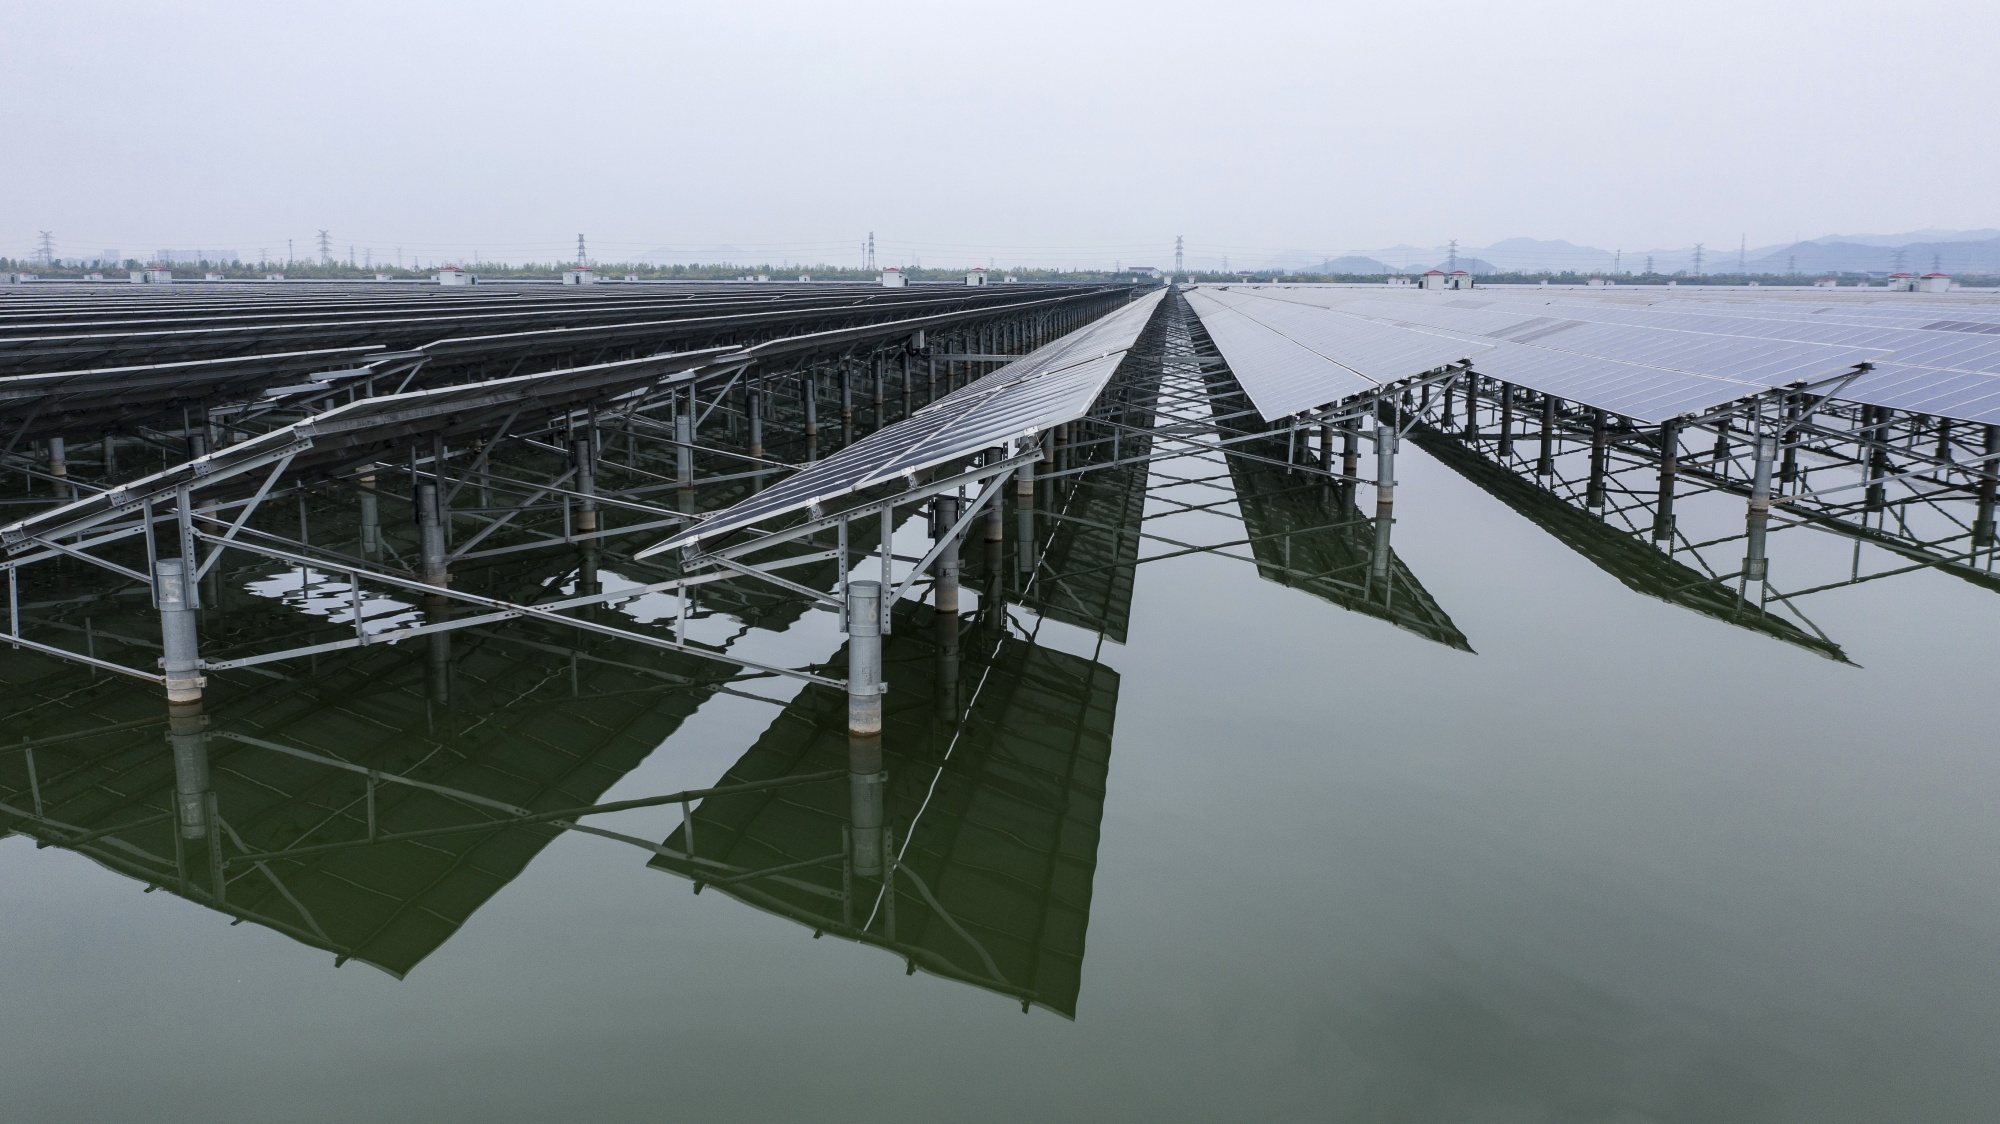 Photovoltaic panels stand in a floating solar farm on the outskirts of Ningbo, Zhejiang Province, China.